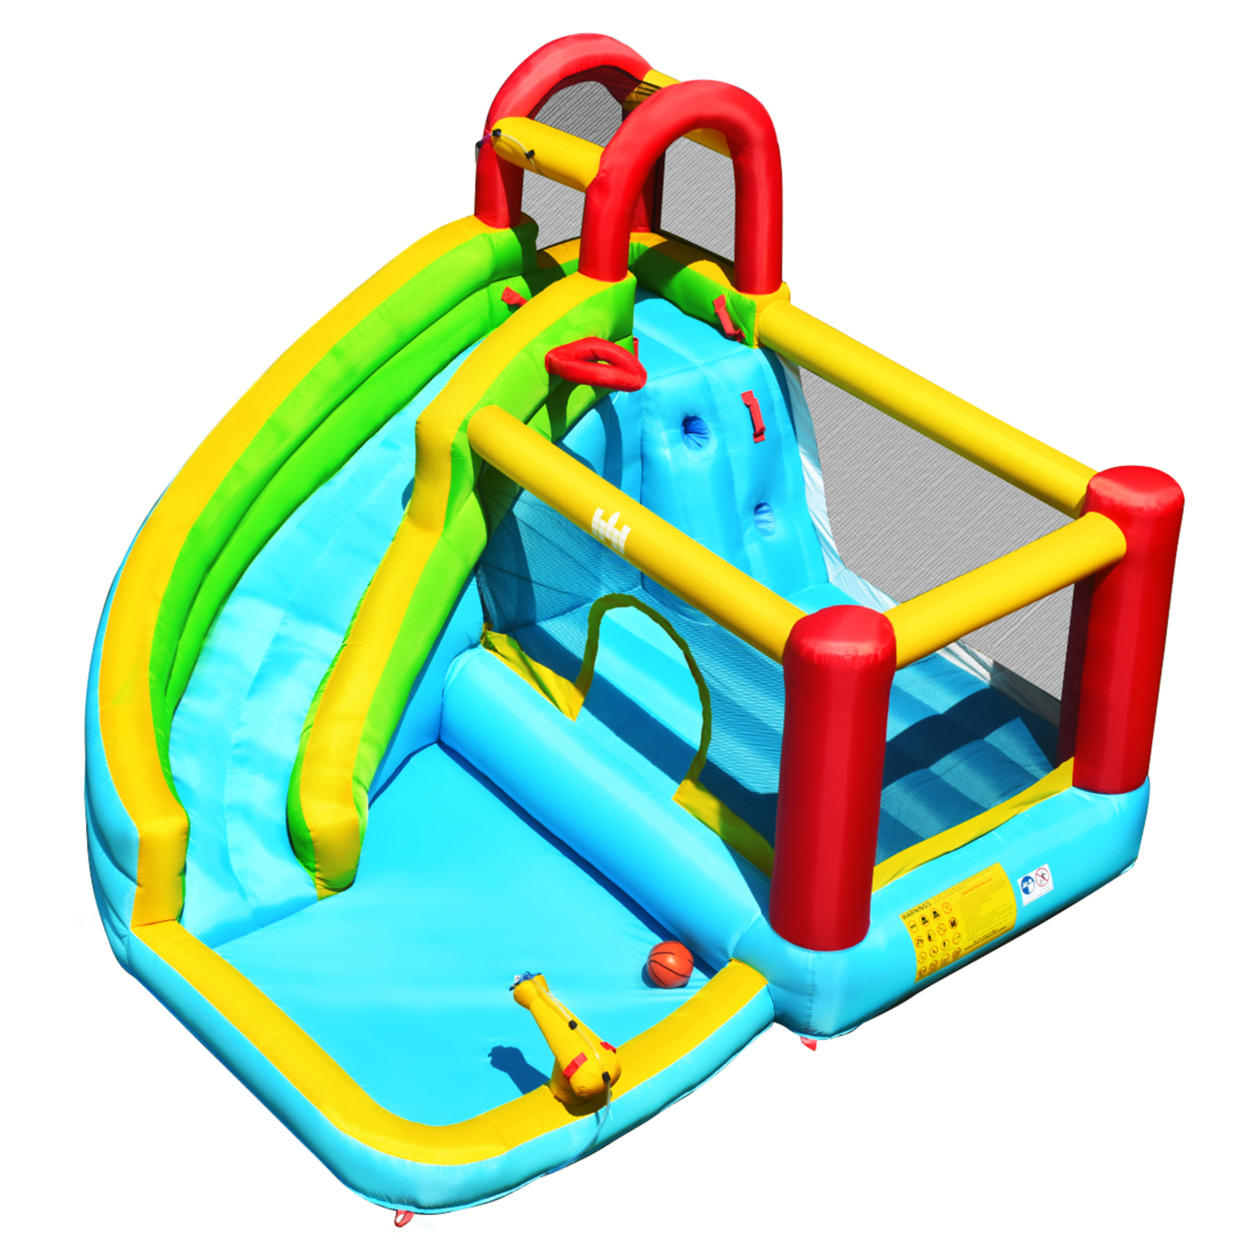 Inflatable Kids Water Slide Jumper Bounce House Splash Water Pool Without Blower